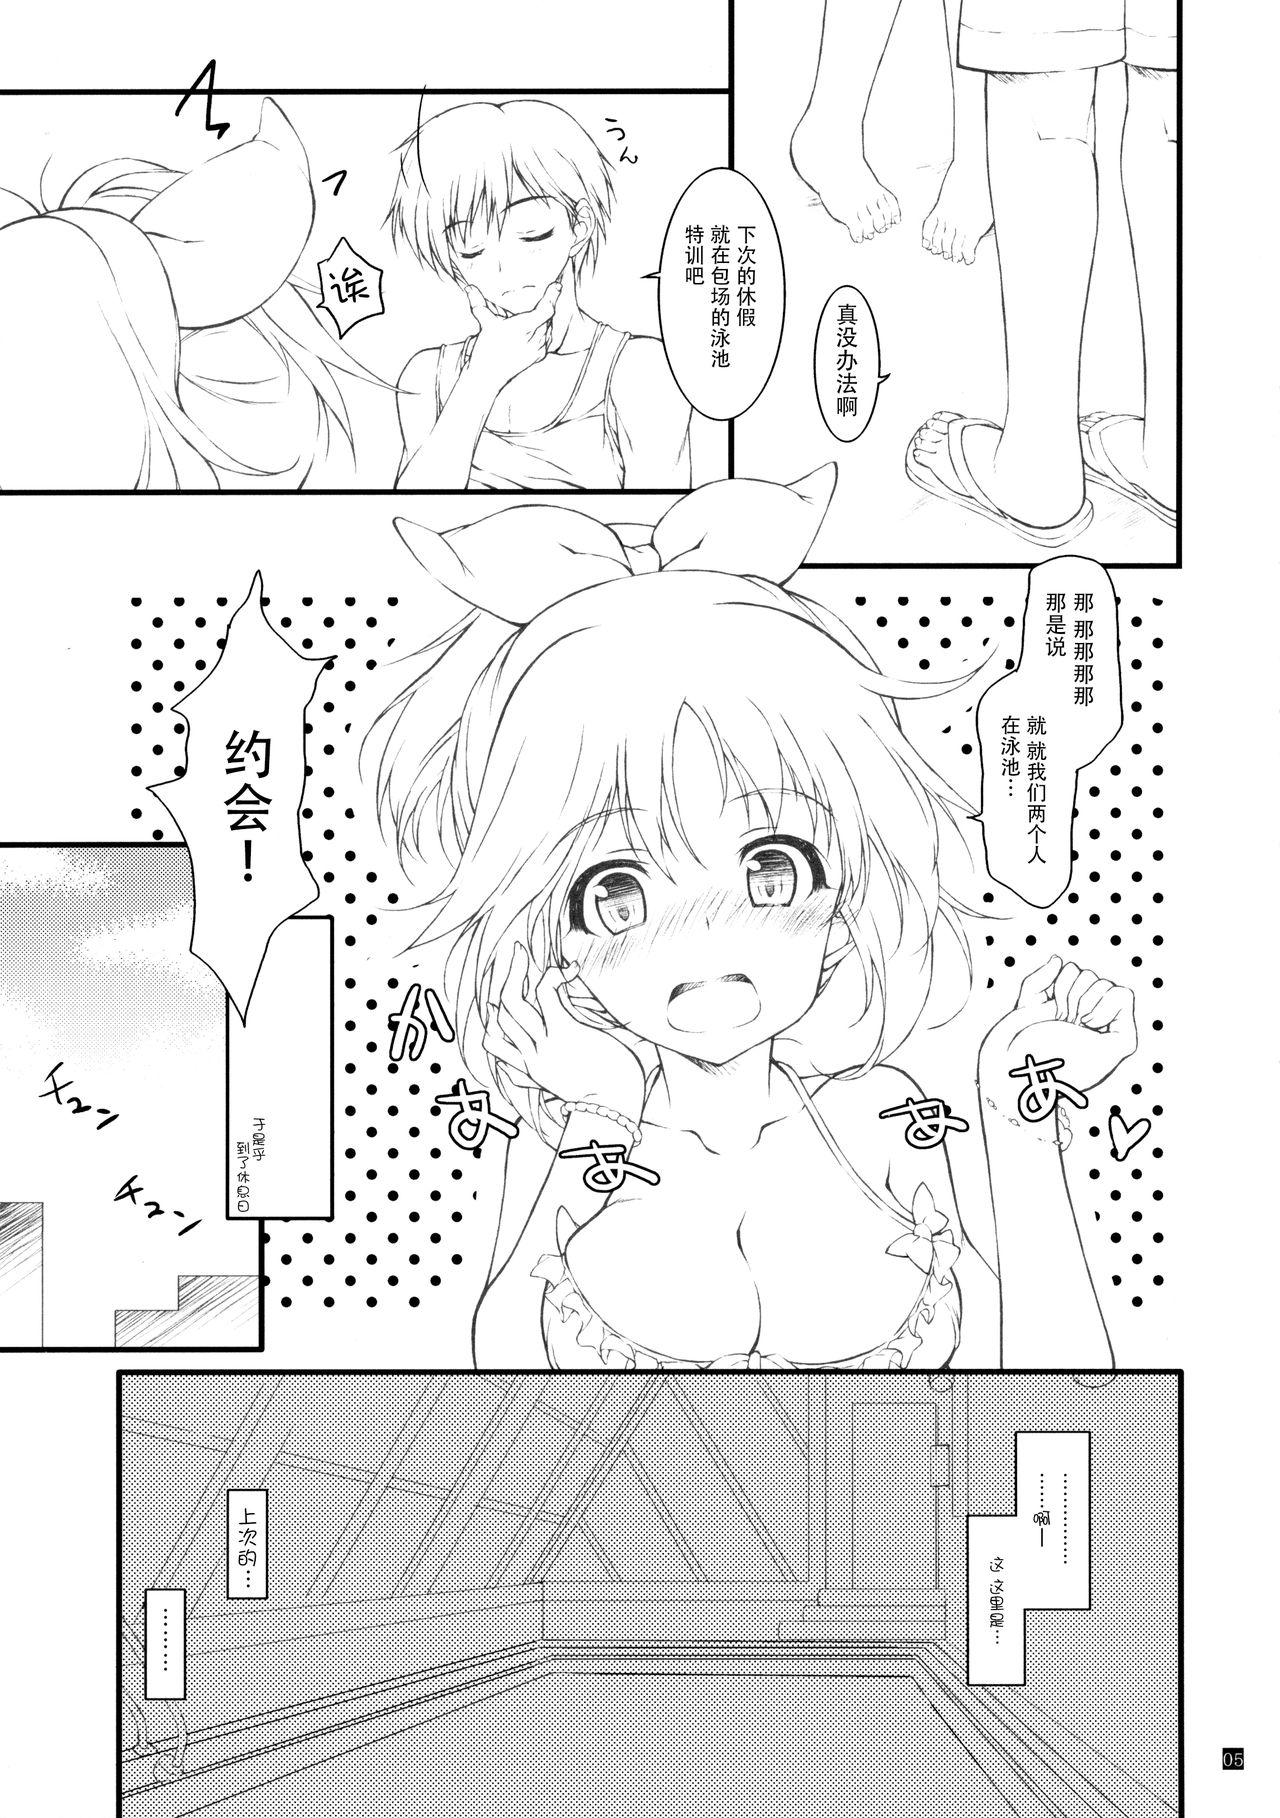 Legs JK to Pool - The idolmaster Sex Party - Page 5